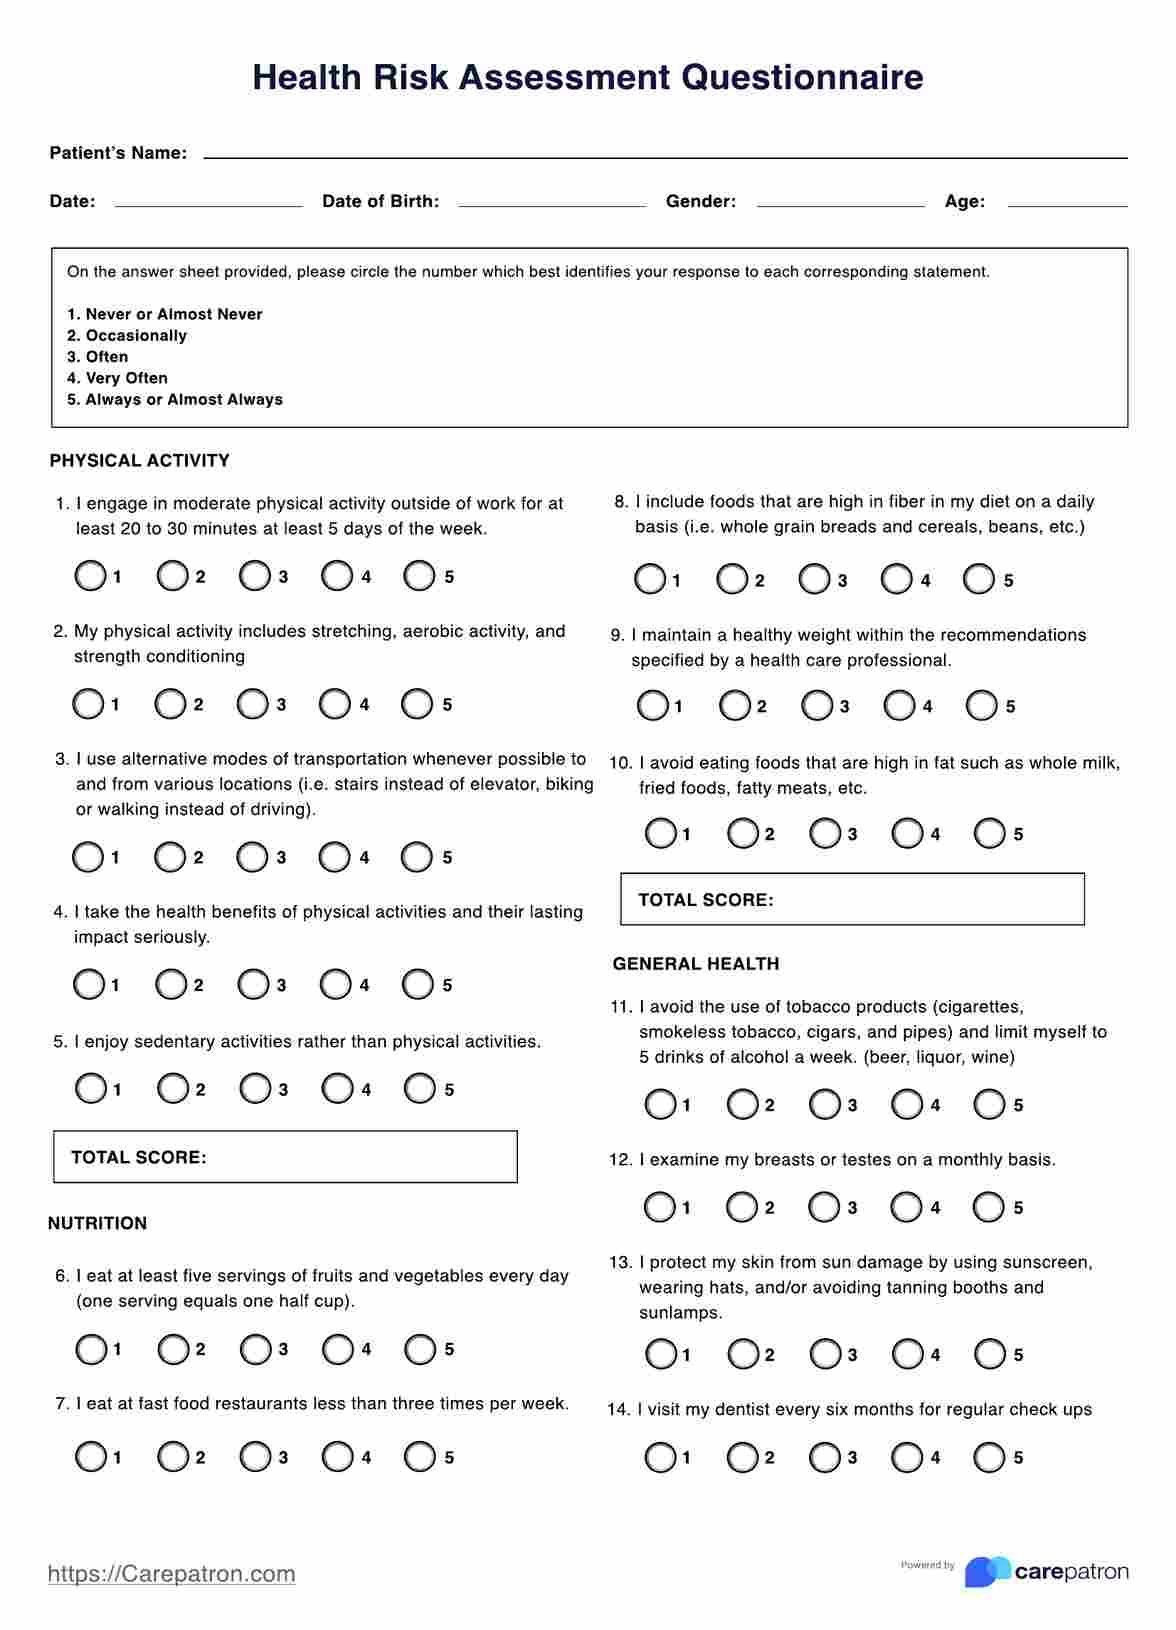 Health Risk Assessment Questionnaire PDF Example